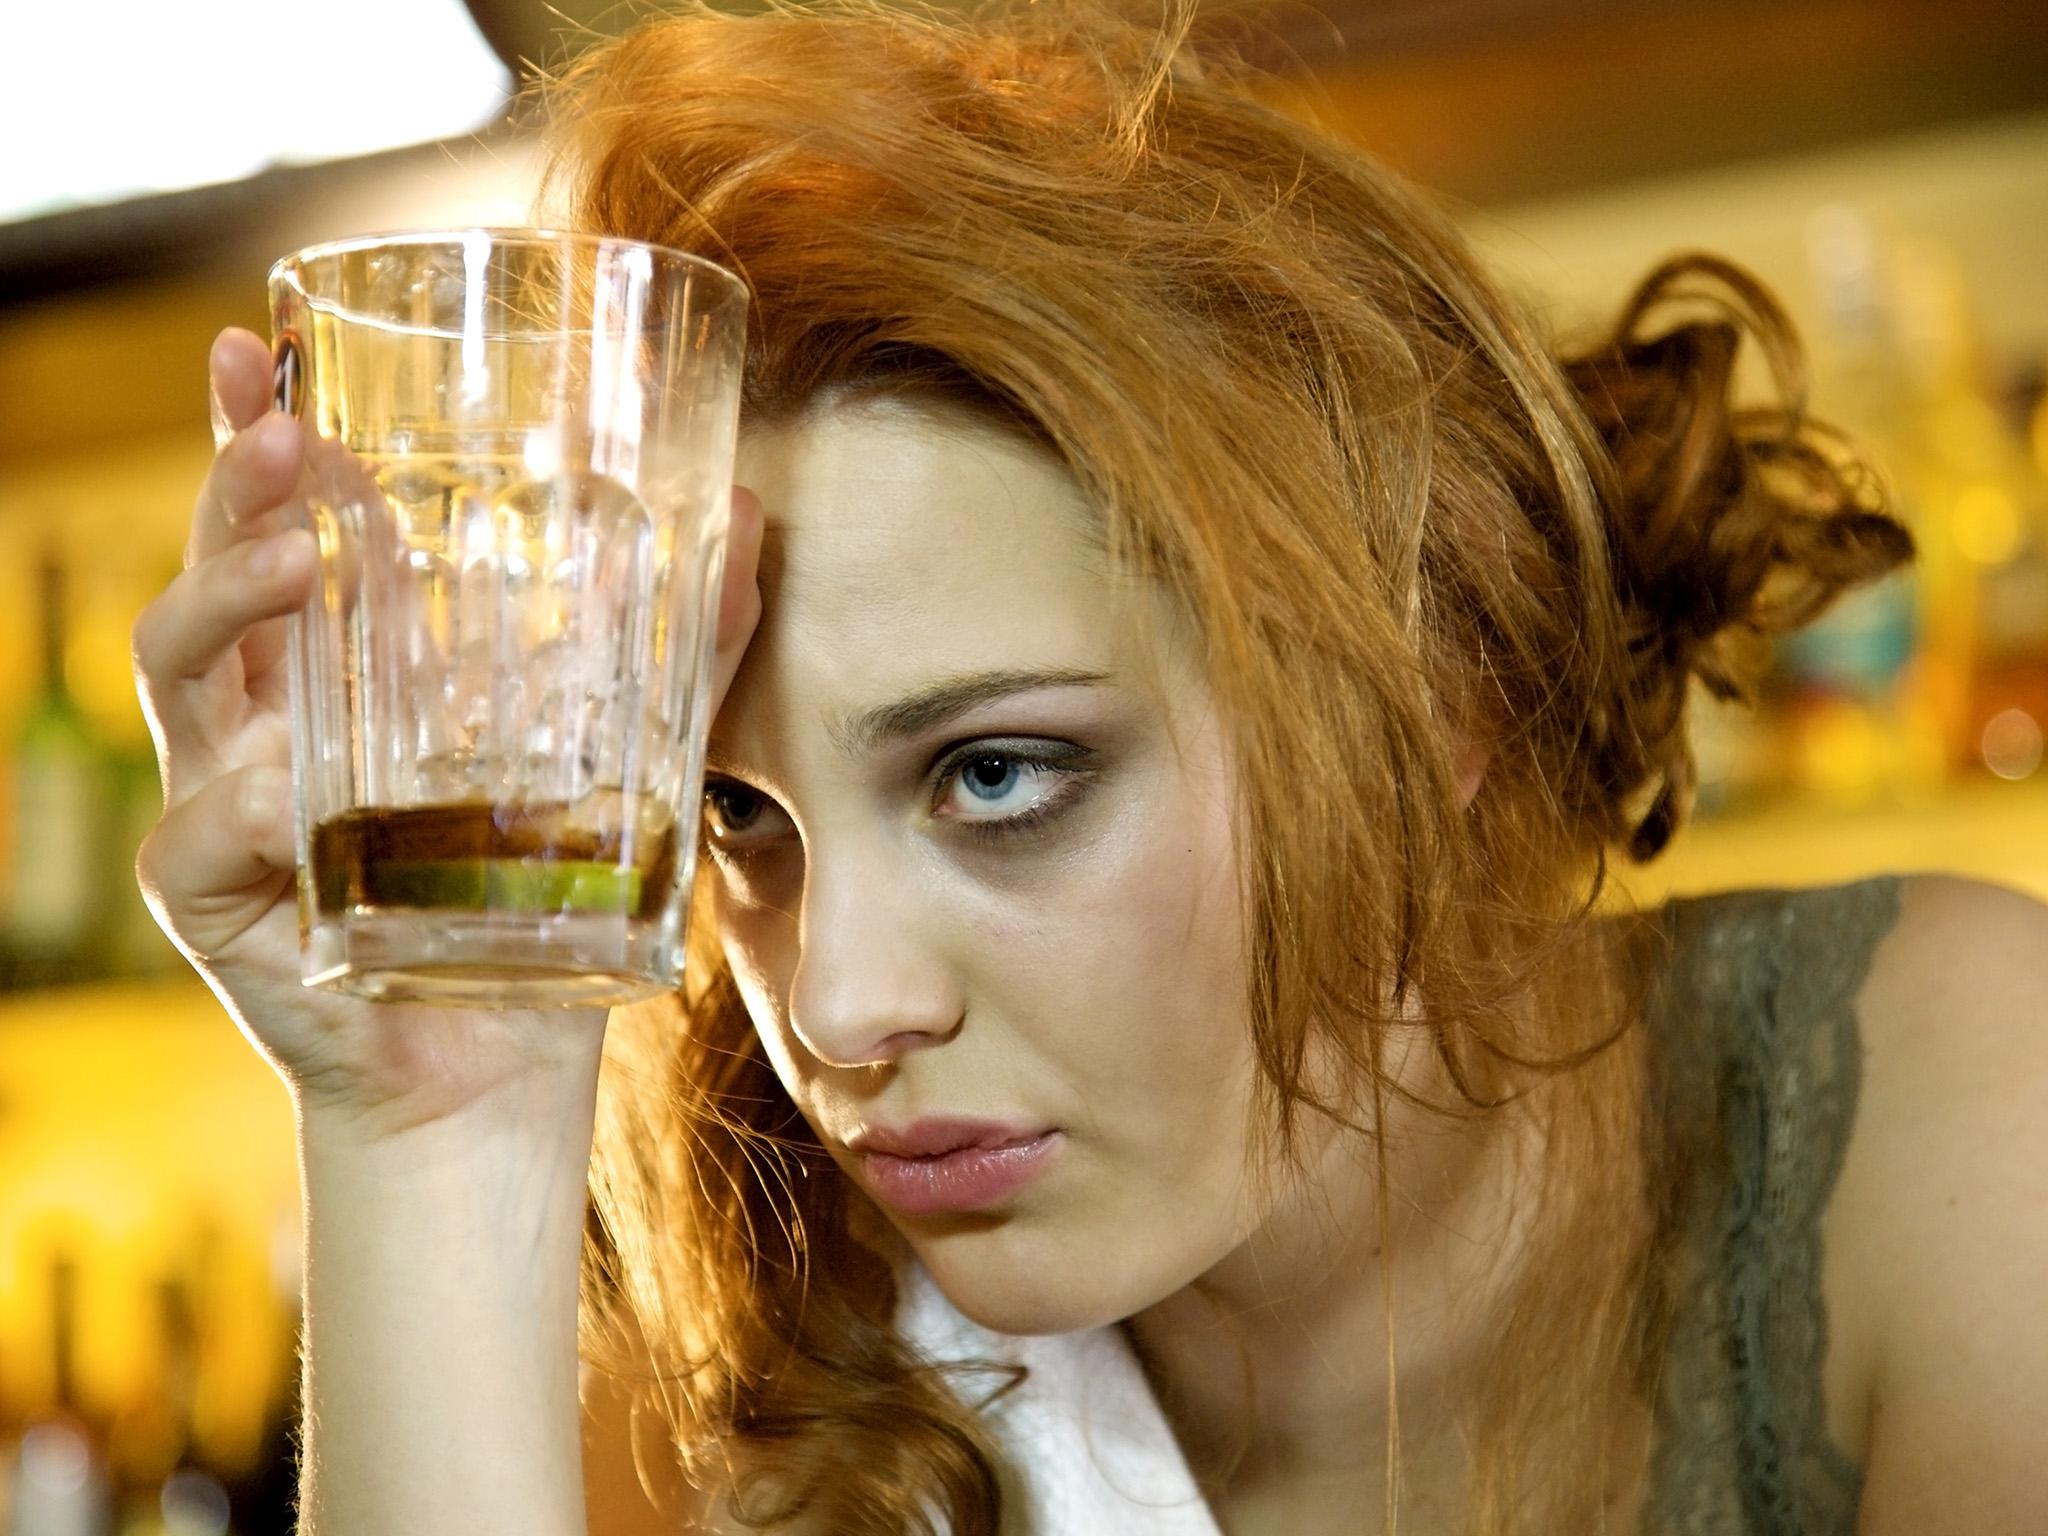 Help your body recover with one of our tried-and-tested hangover remedies